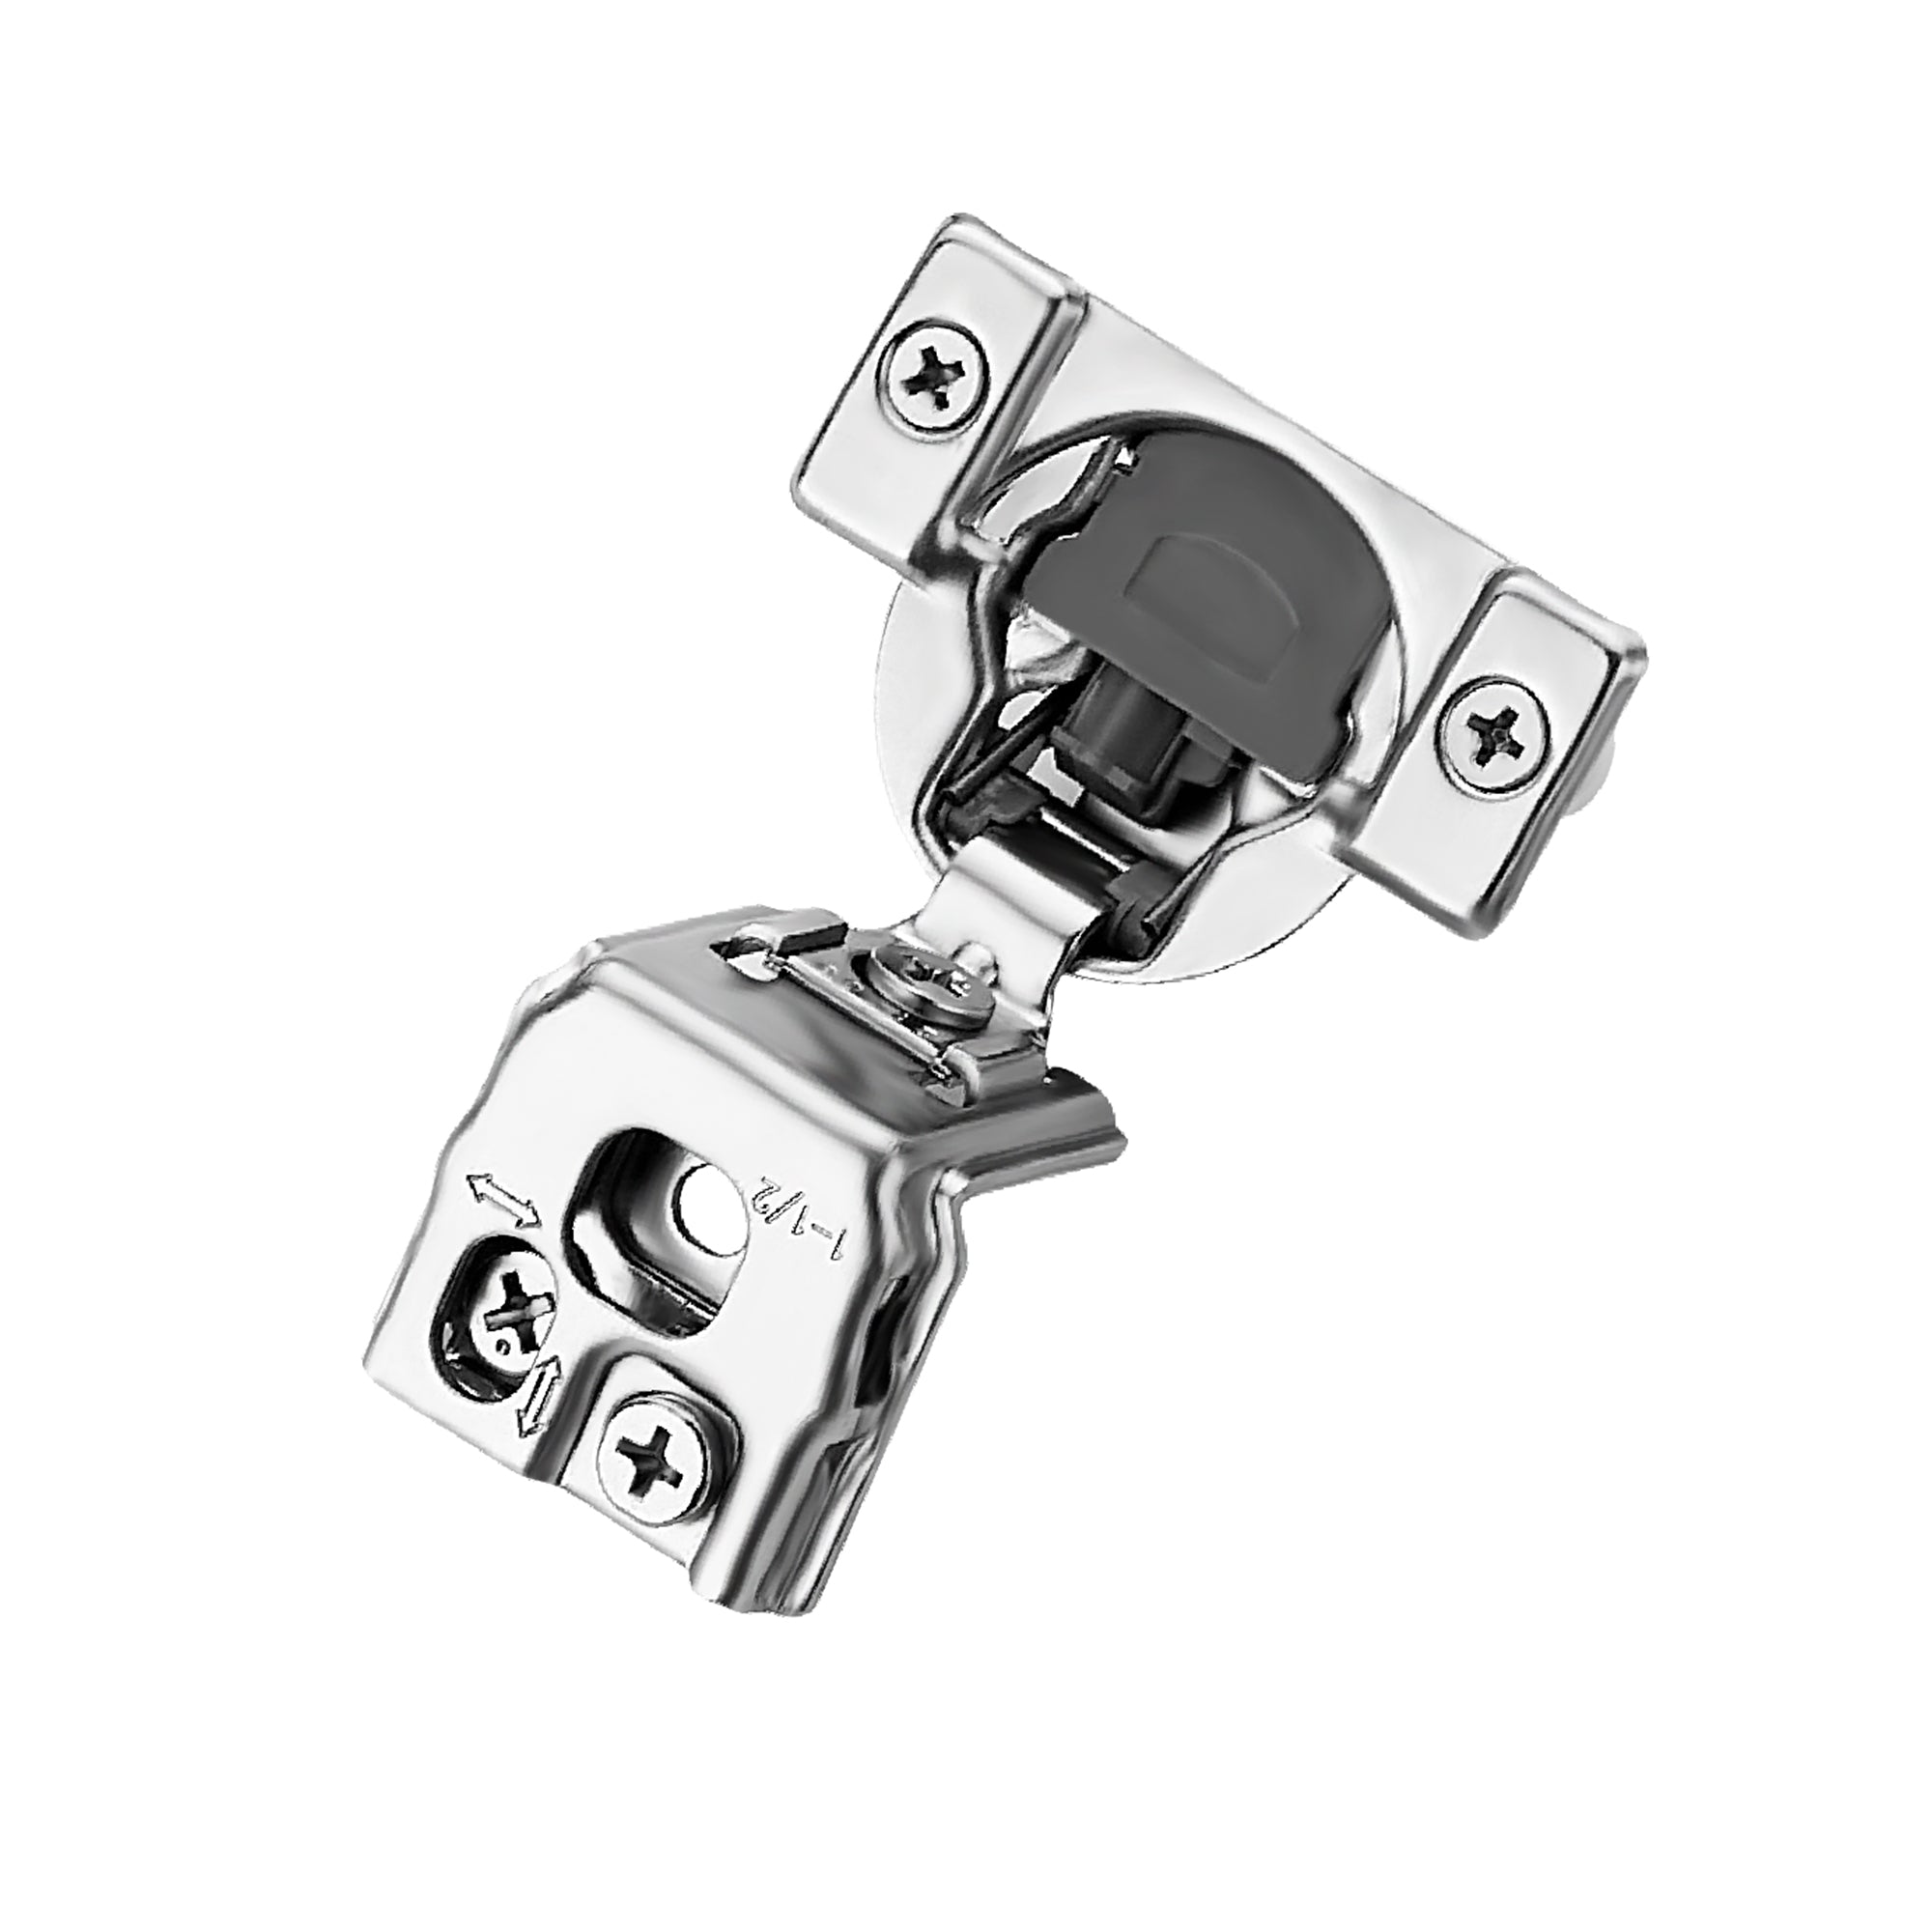 Soft Close Hinges for Kitchen Cabinet Hinges Satin Nickel Hidden Hinges Stainless Steel Concealed Hinge self Closing